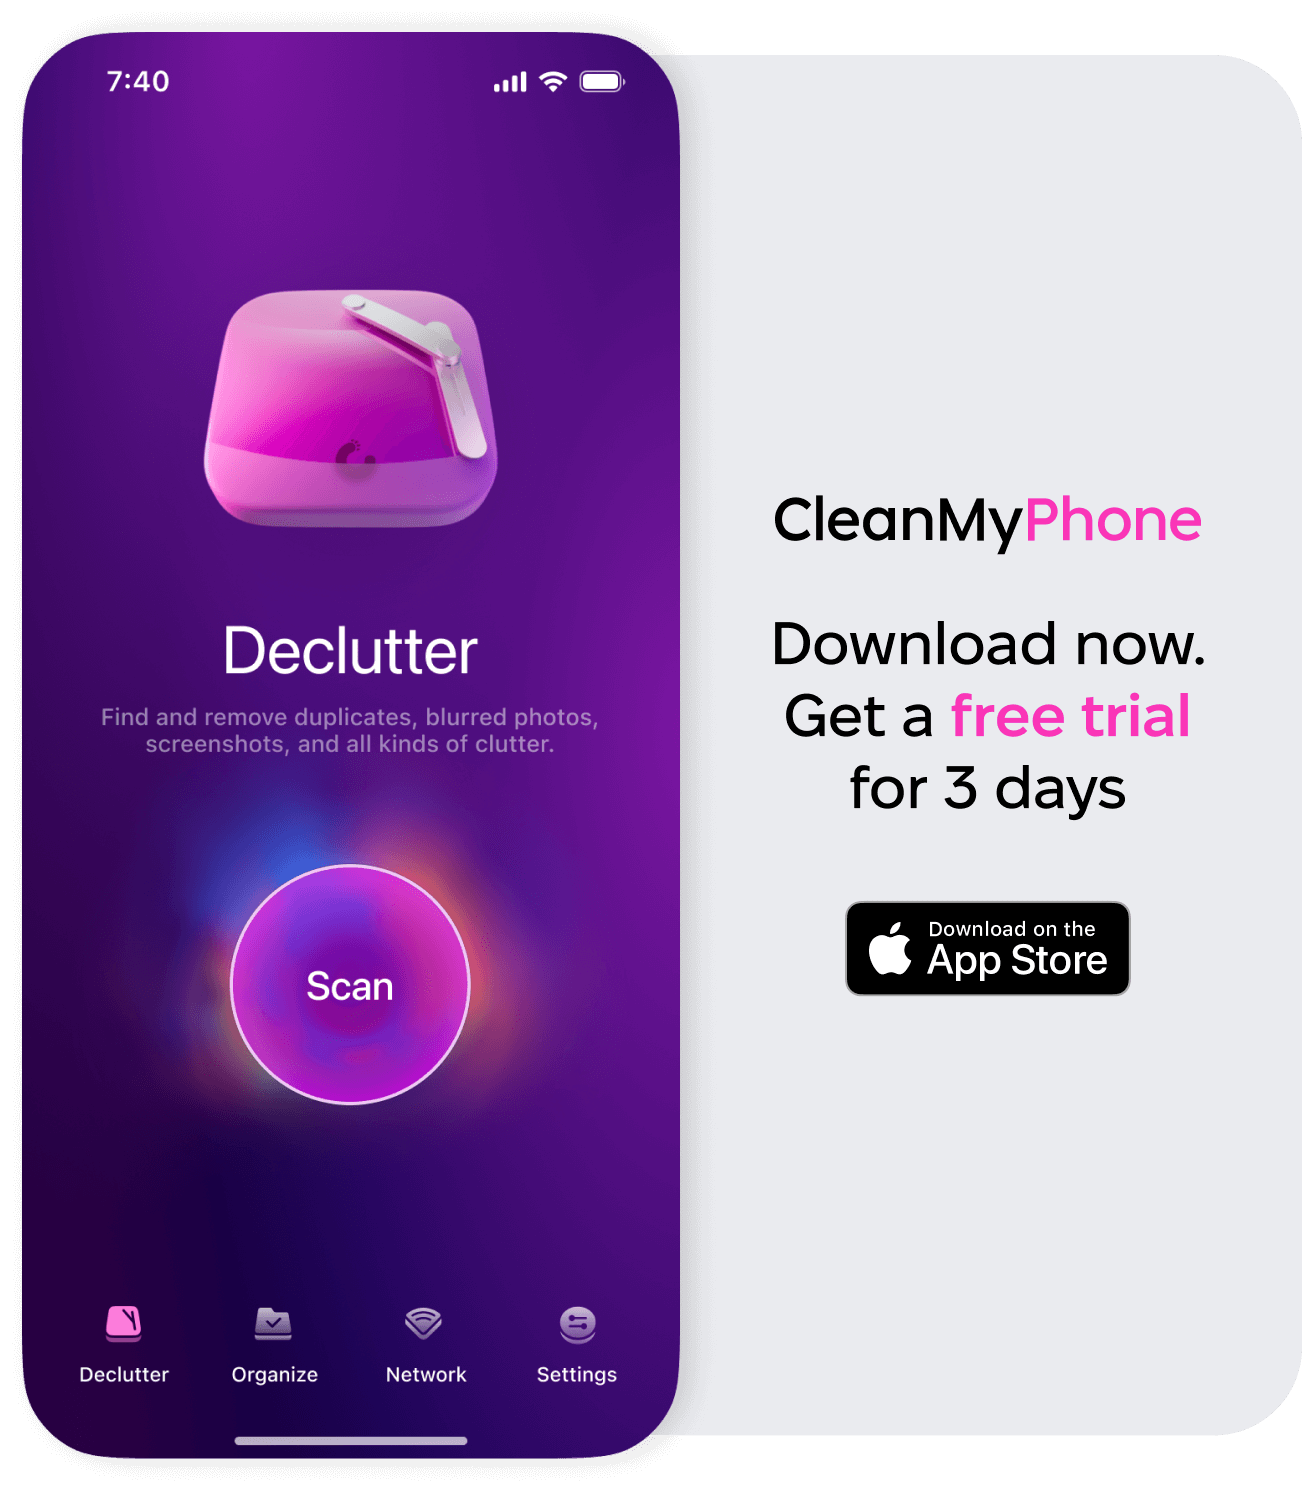 CleanMy®Phone Declutter module